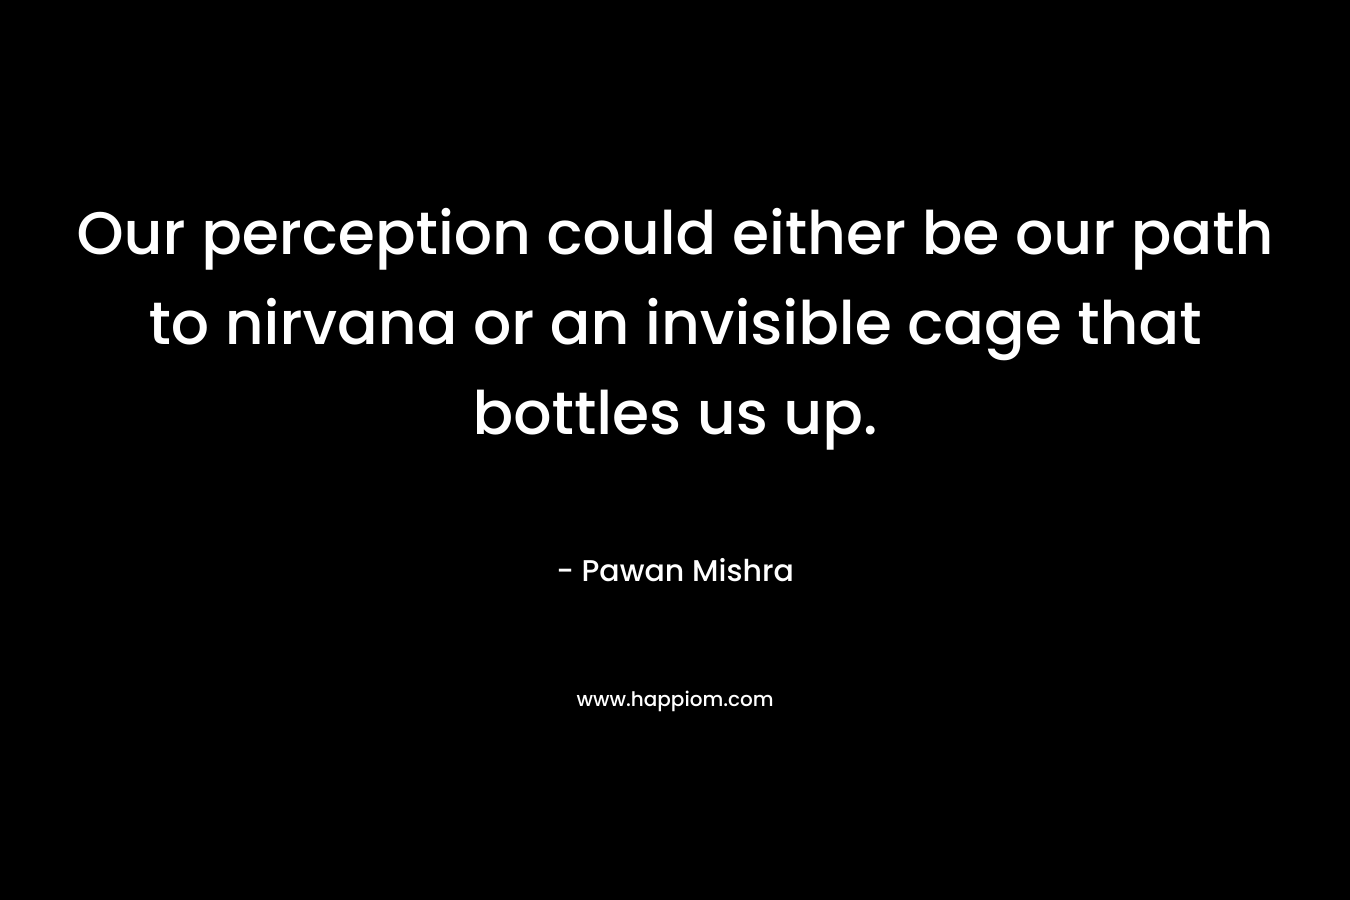 Our perception could either be our path to nirvana or an invisible cage that bottles us up. – Pawan Mishra